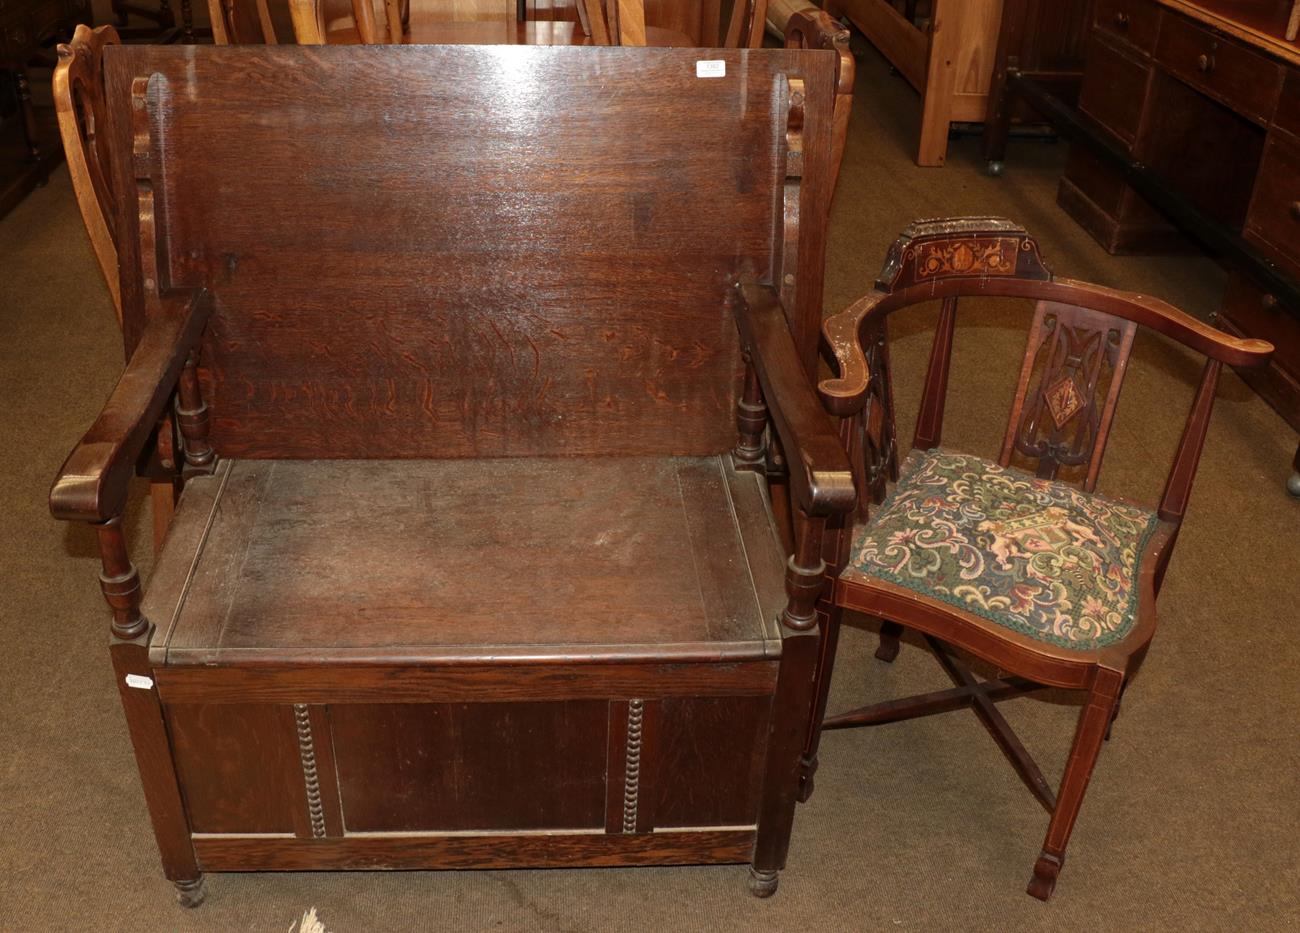 Lot 1382 - An early 20th century carved oak monks' bench, and an upholstered corner chair